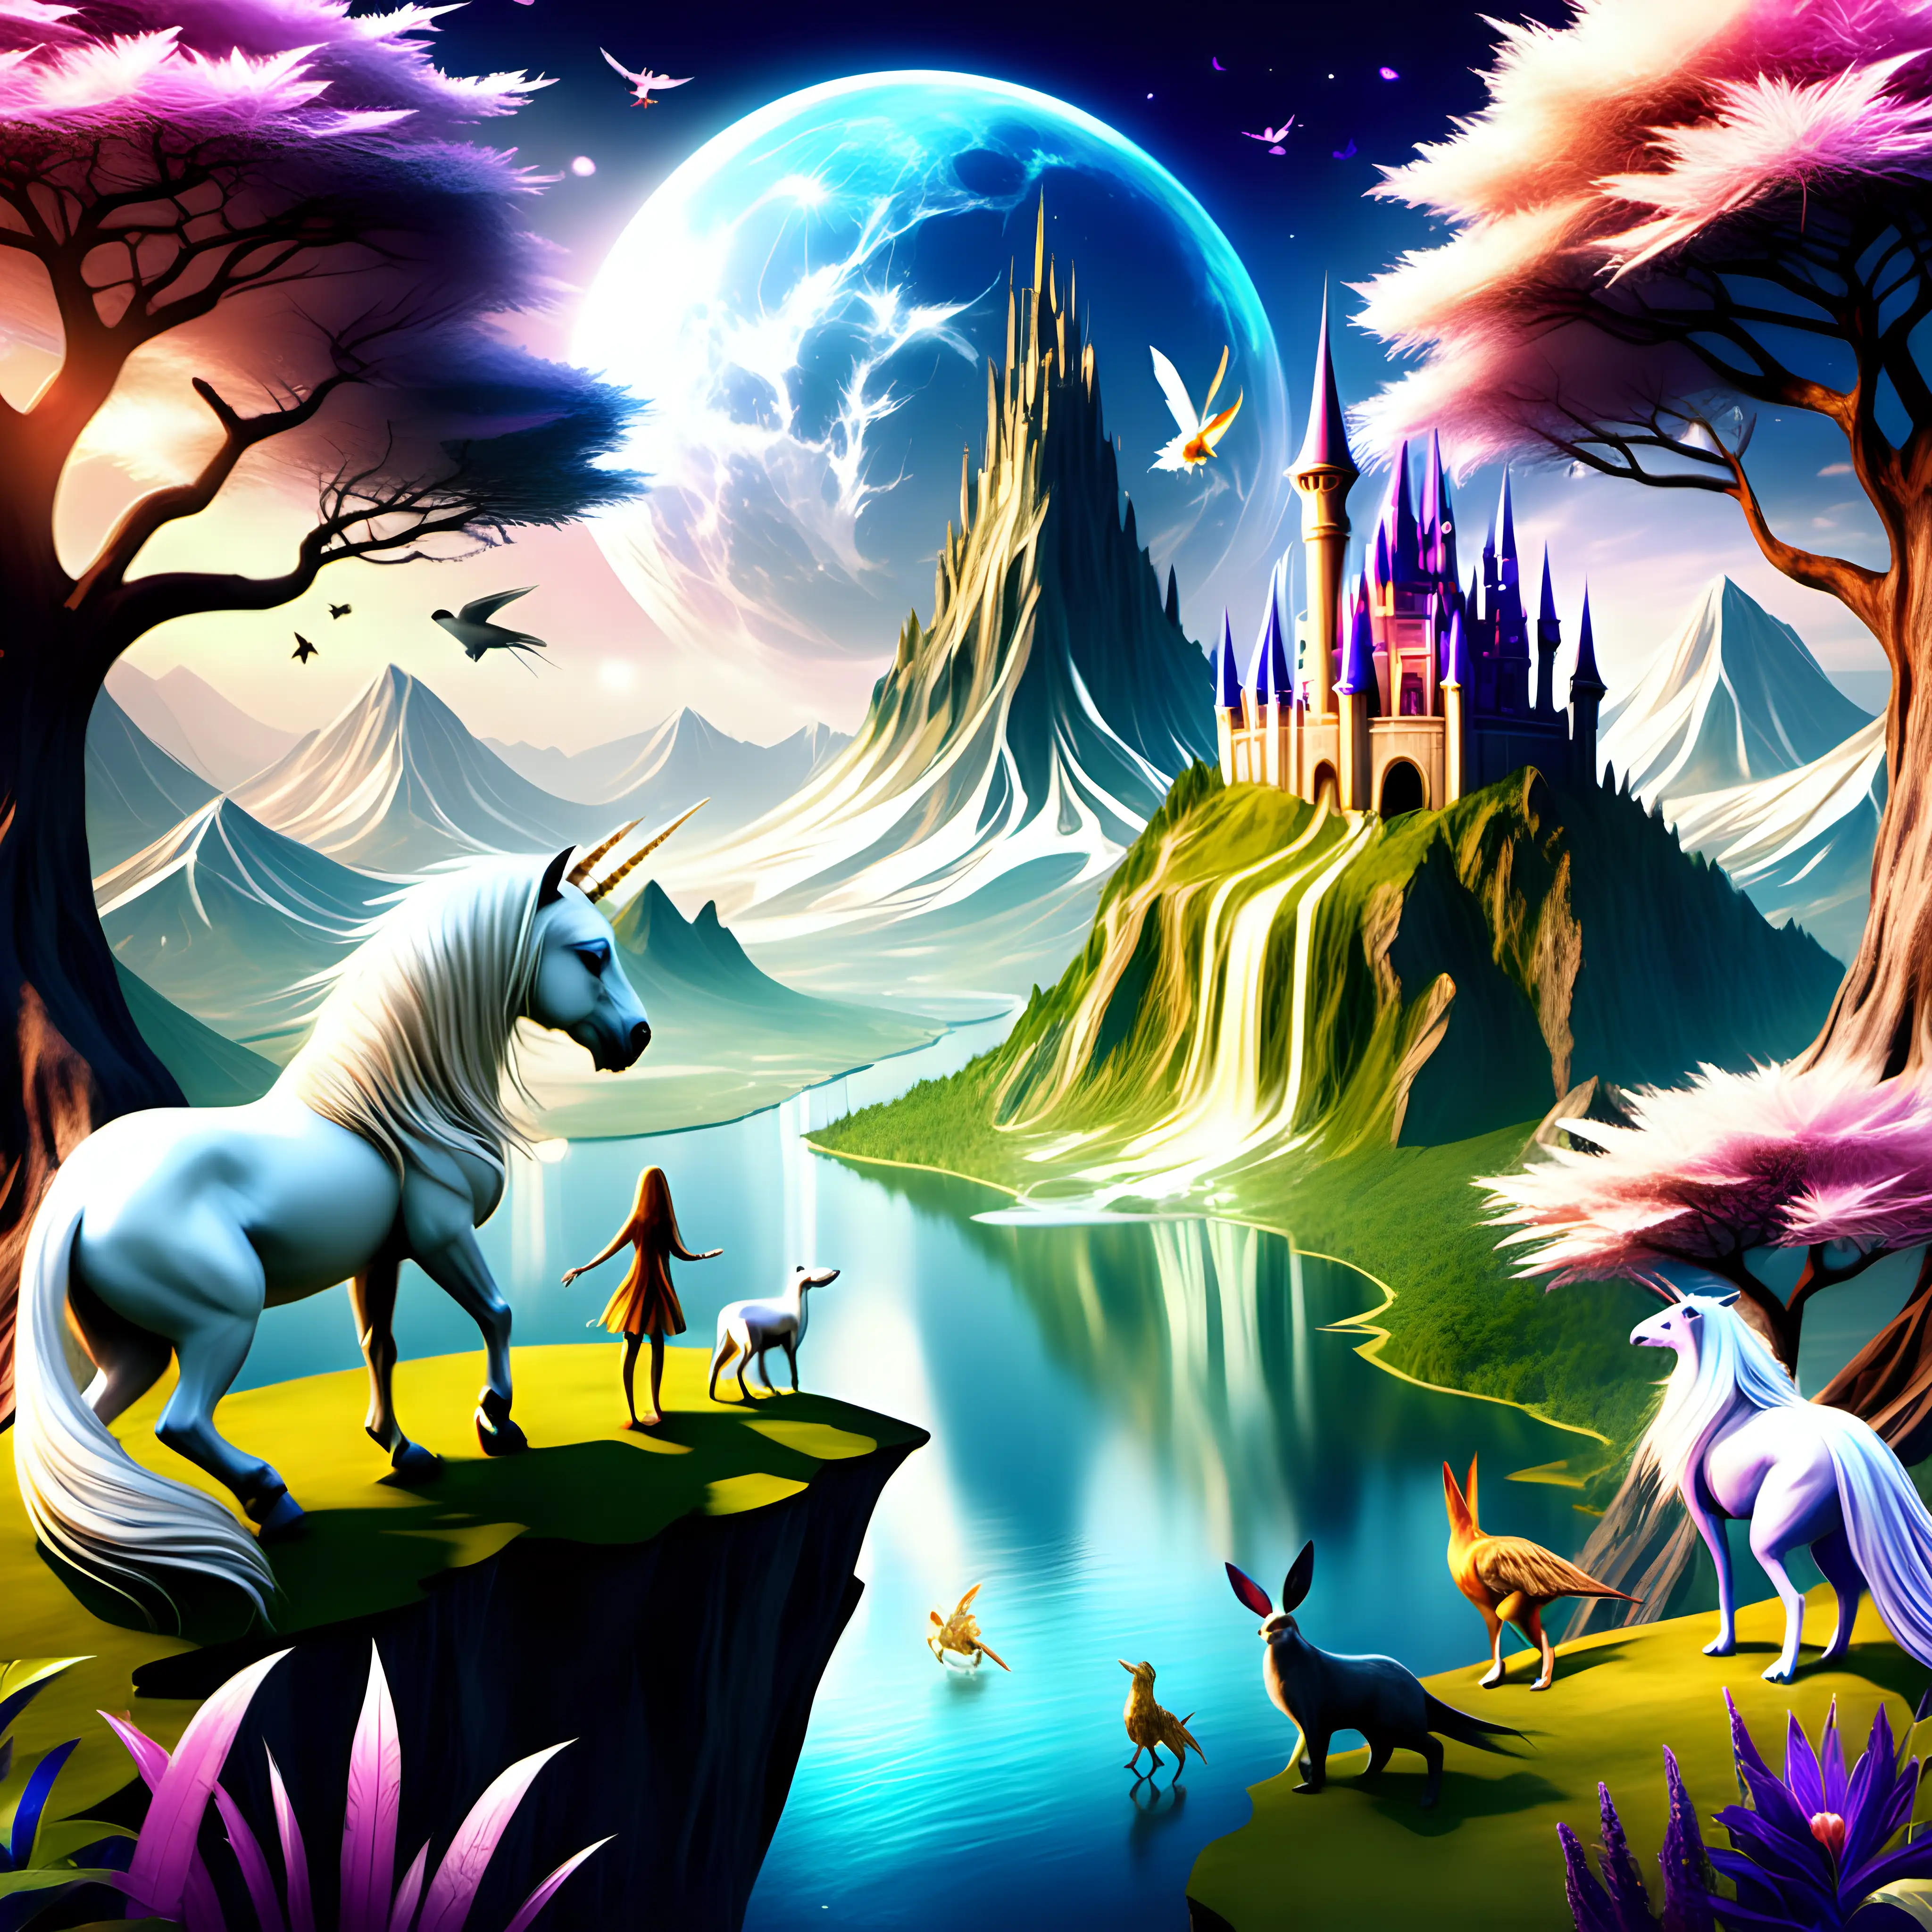 Enchanting Realm of Magical Creatures in a Picturesque Landscape